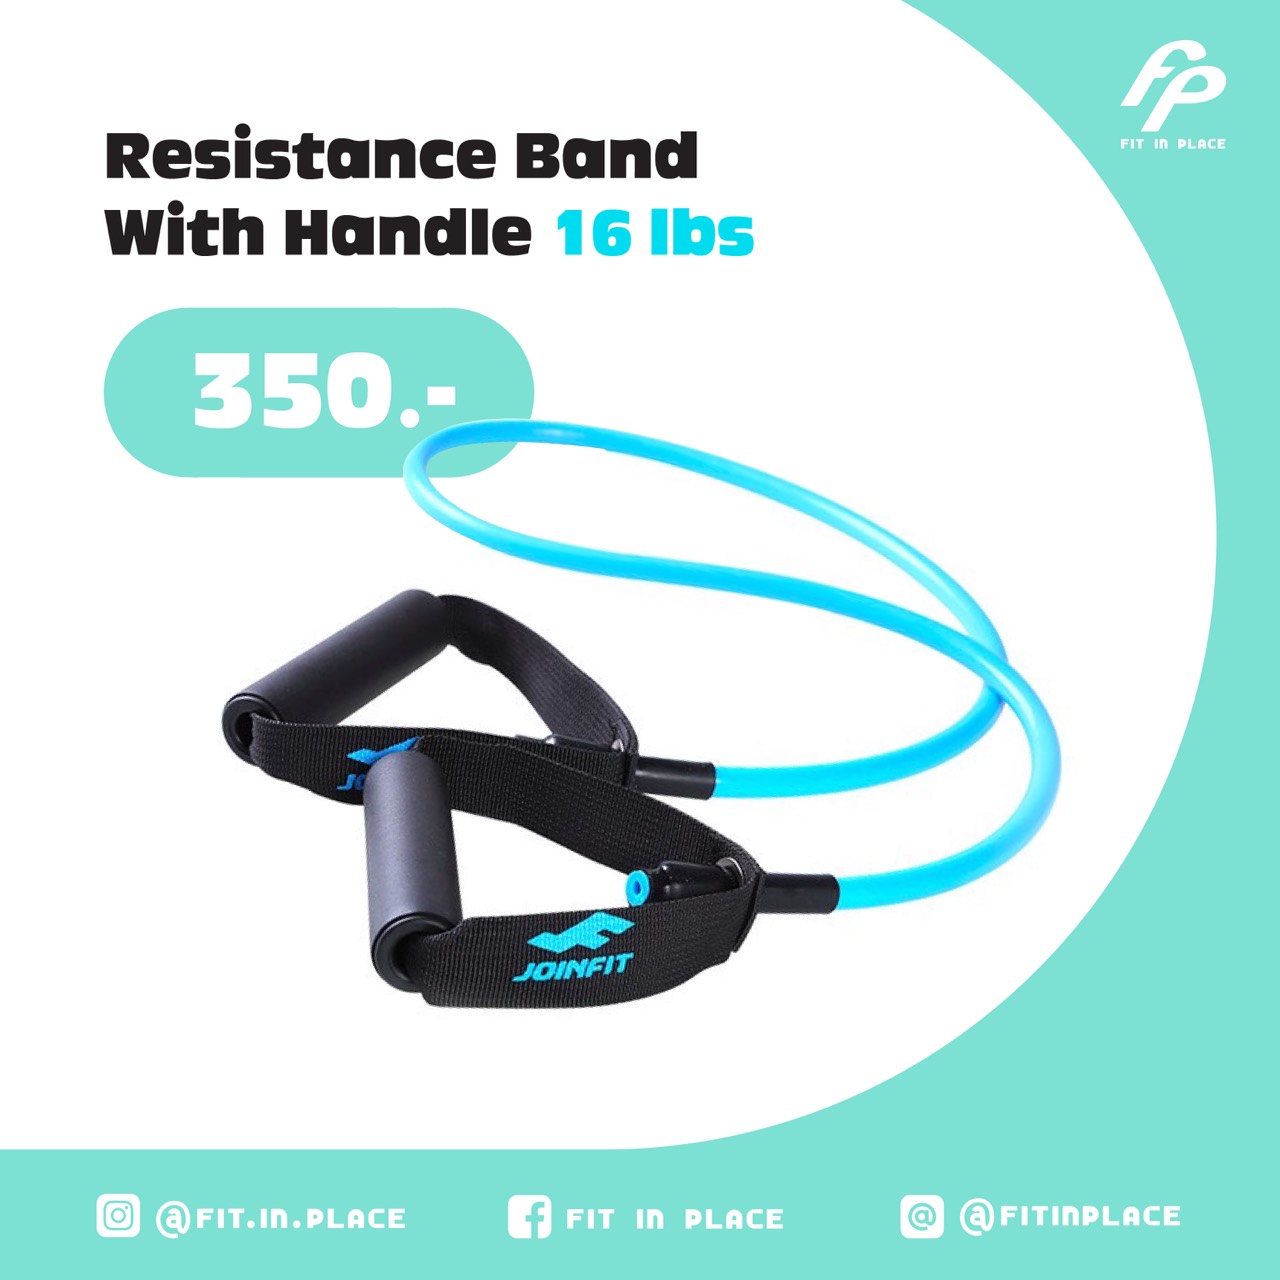 Fit in Place - Joinfit Resistance Band with Handle 16 lbs